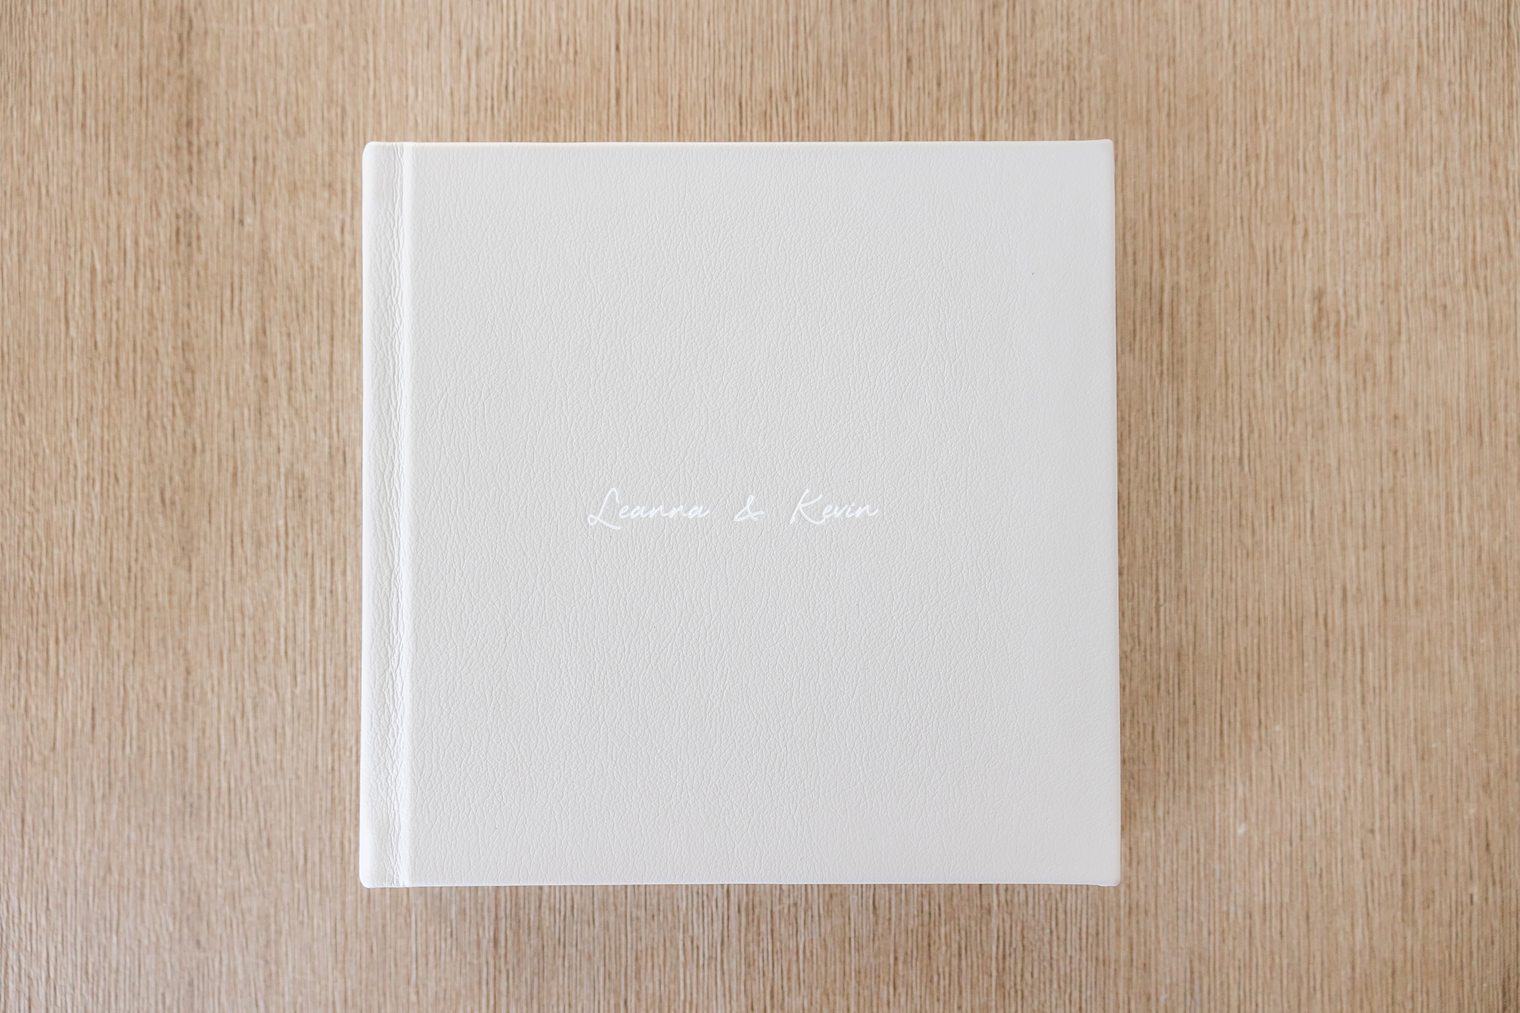 engraving of Leanna and Kevin's engagement album